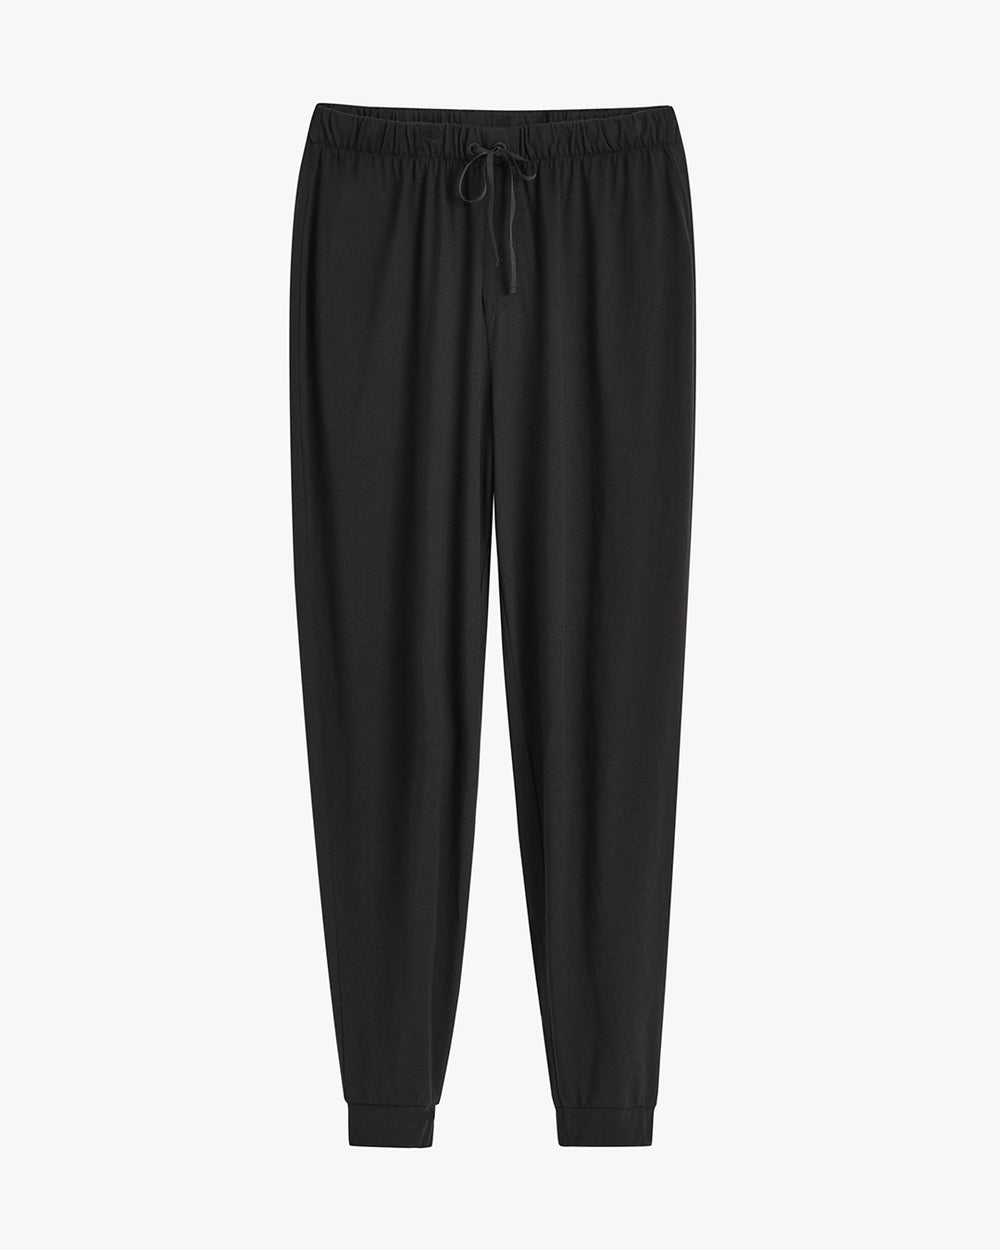 Pair of jogger pants with drawstring and elastic cuffs